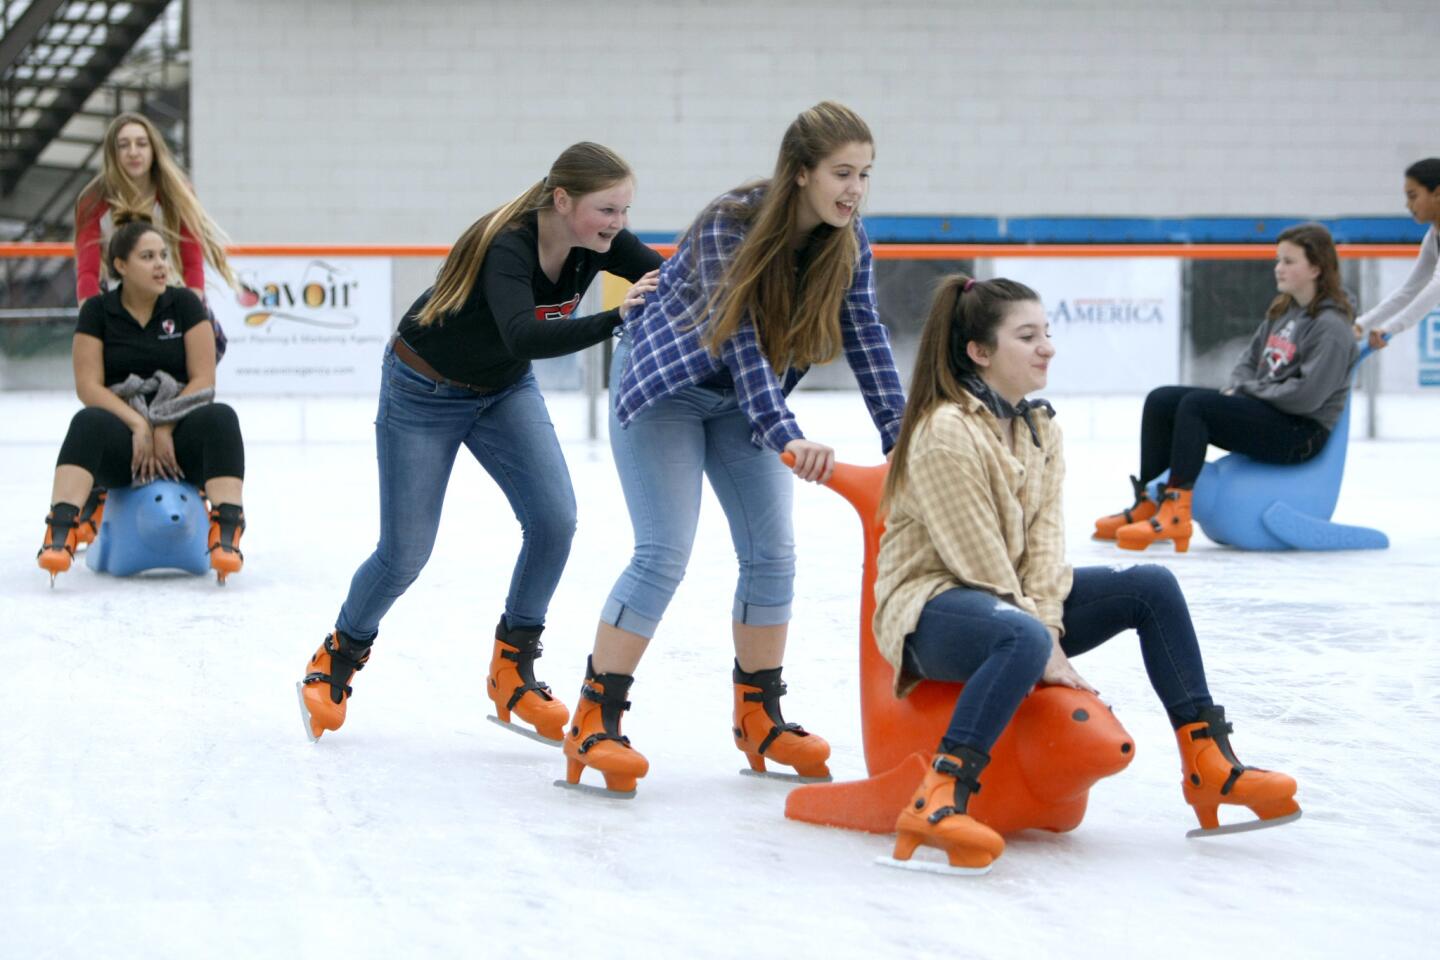 Village Christian students, from left, Olivia, Brooke and Michaela, push each other in a line on opening day at the Rink in downtown Burbank on Thursday, Dec. 15, 2016.